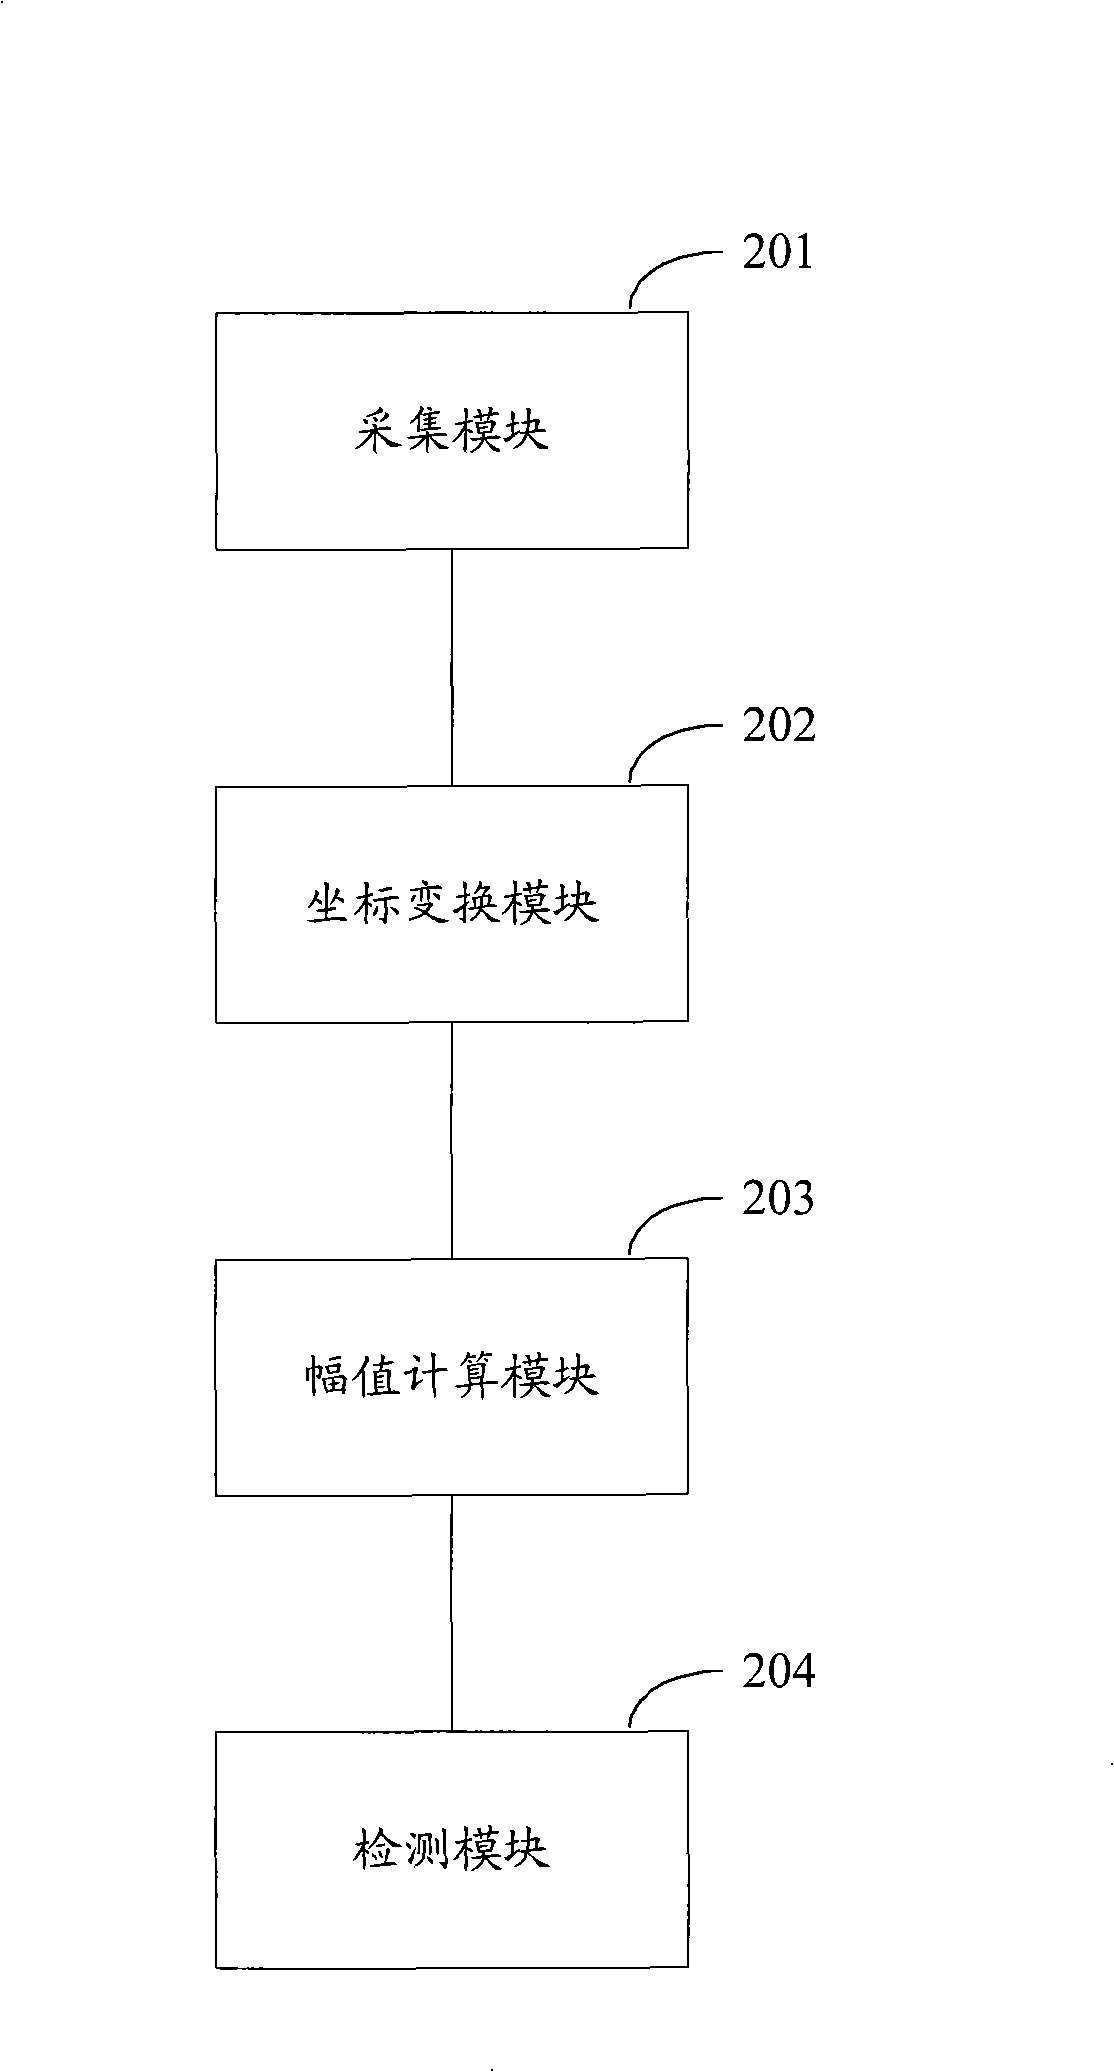 Method and device for phase lack detection of three-phase circuit